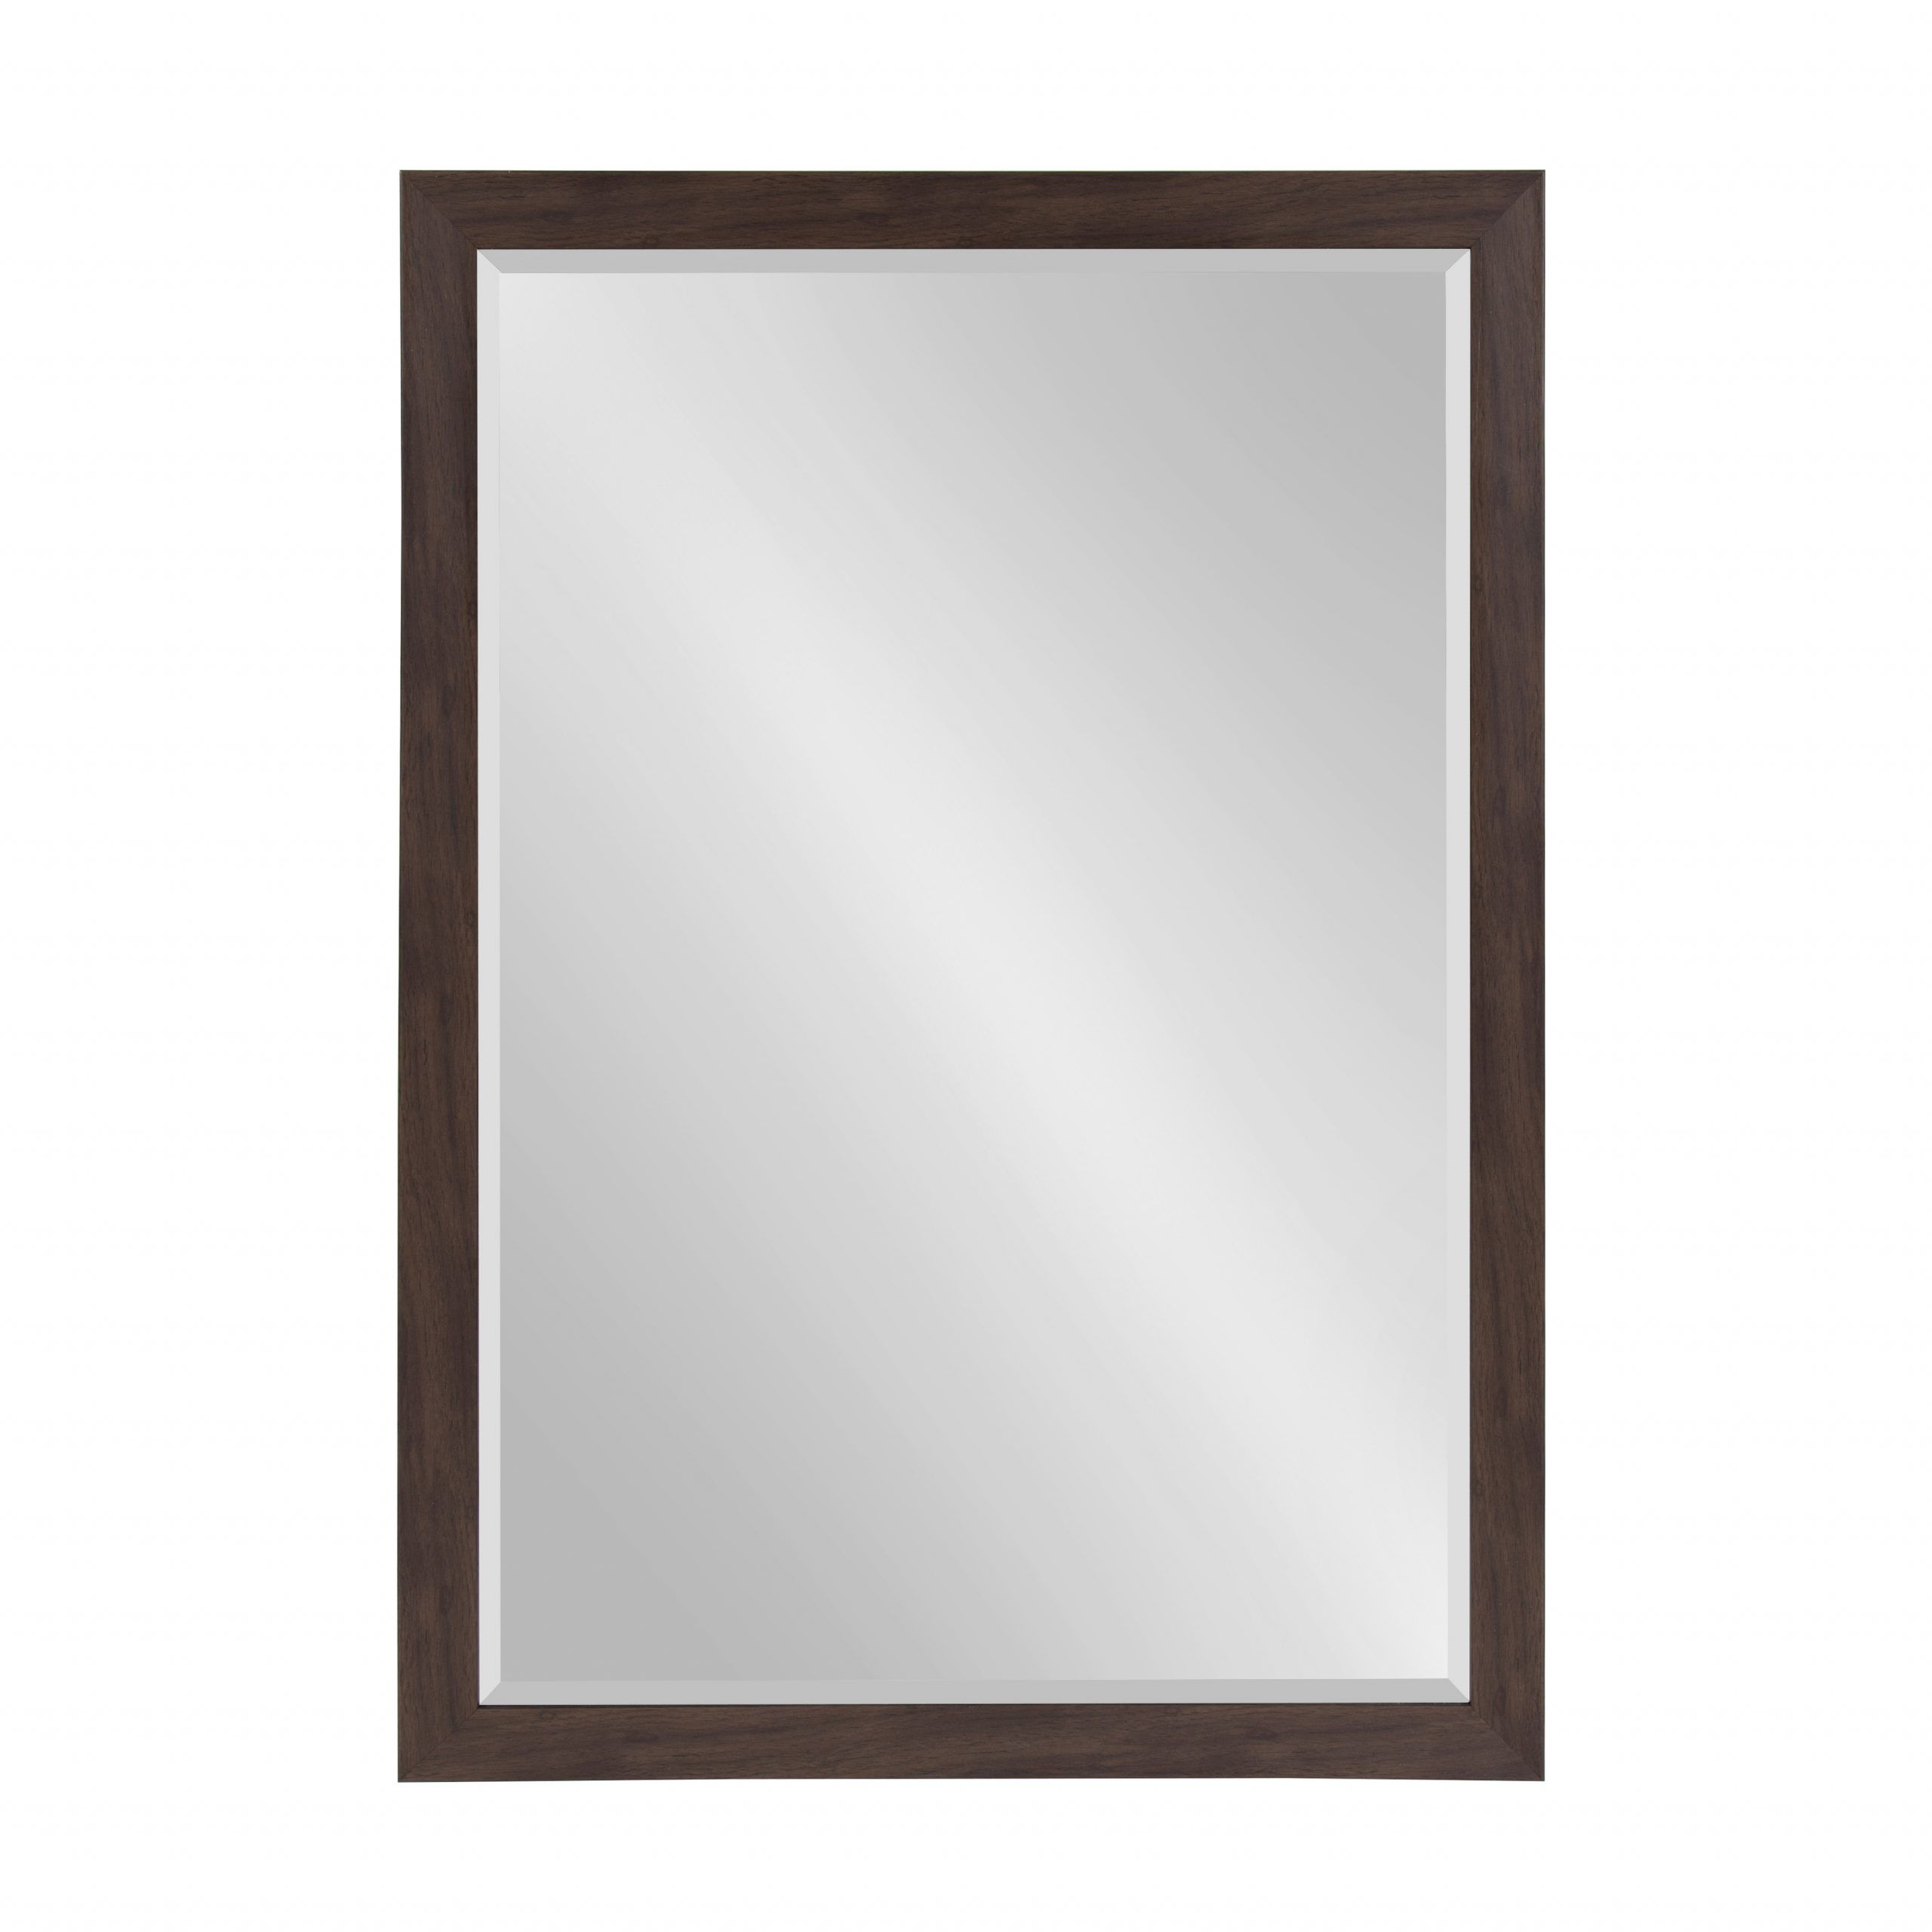 Most Recent Designovation – Beatrice Framed Decorative Rectangle Wall Mirror, 27 X In Rectangular Chevron Edge Wall Mirrors (View 1 of 15)